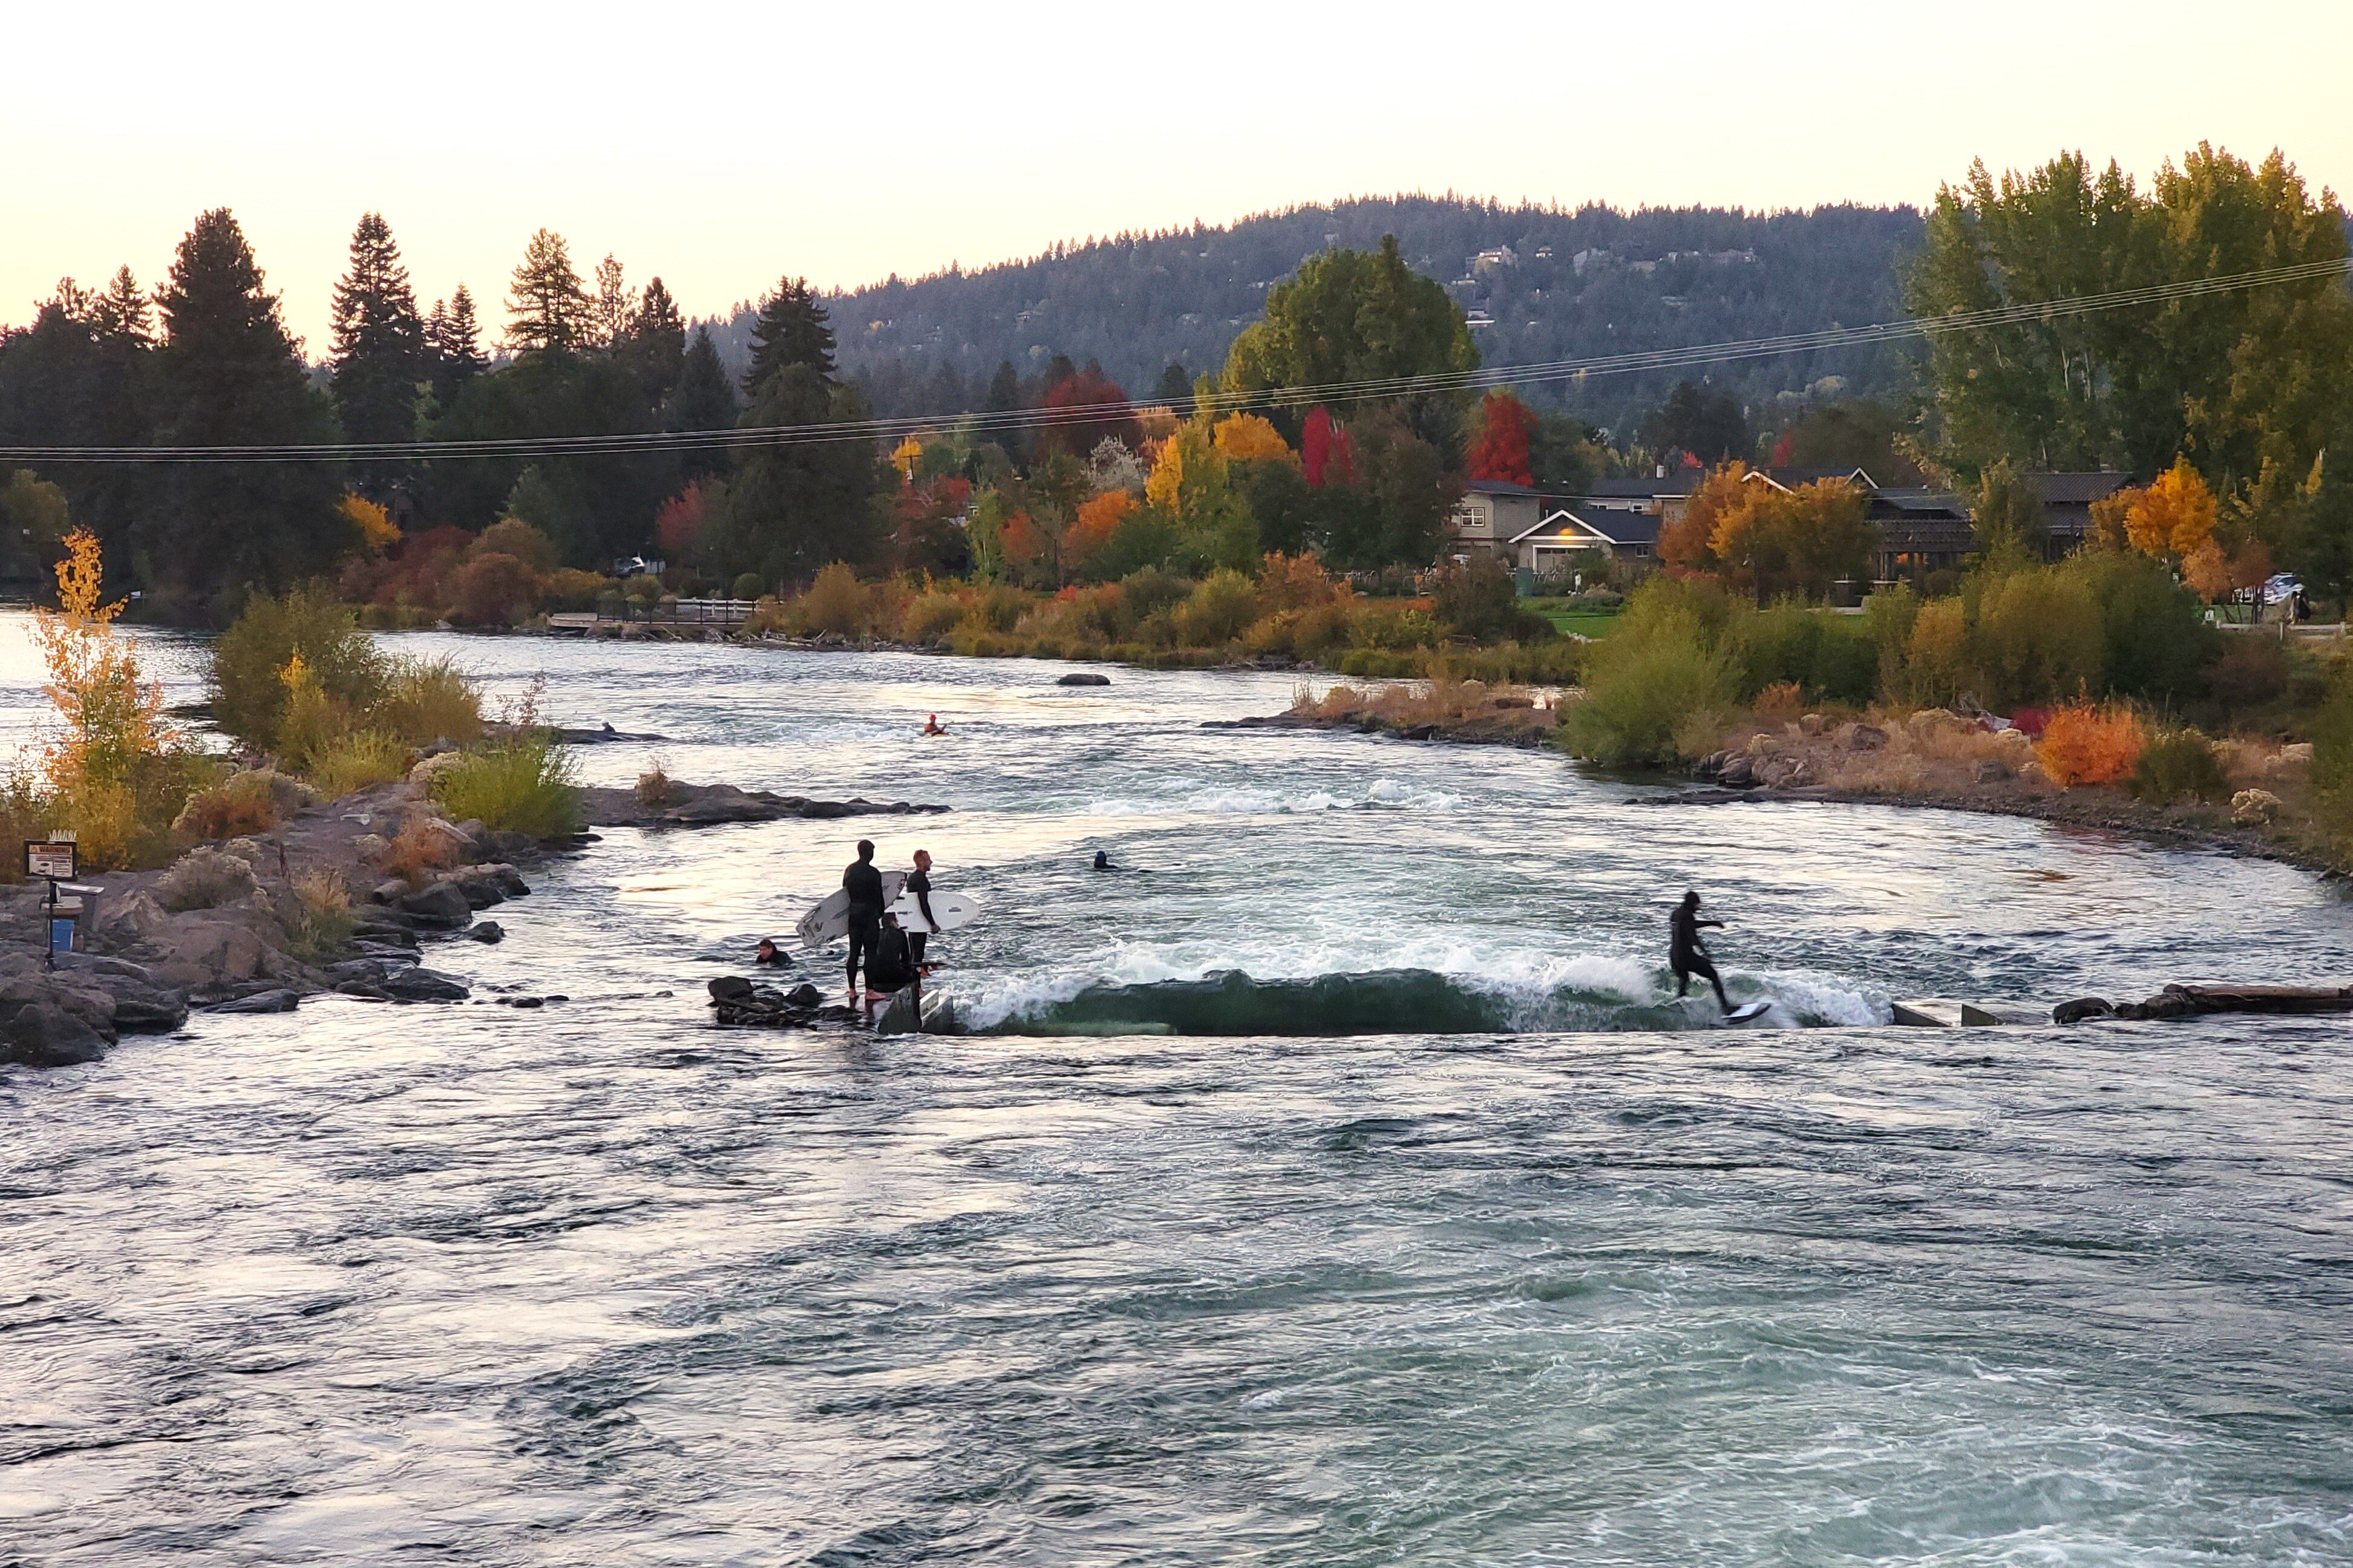 Surfers using the wave at the white water park